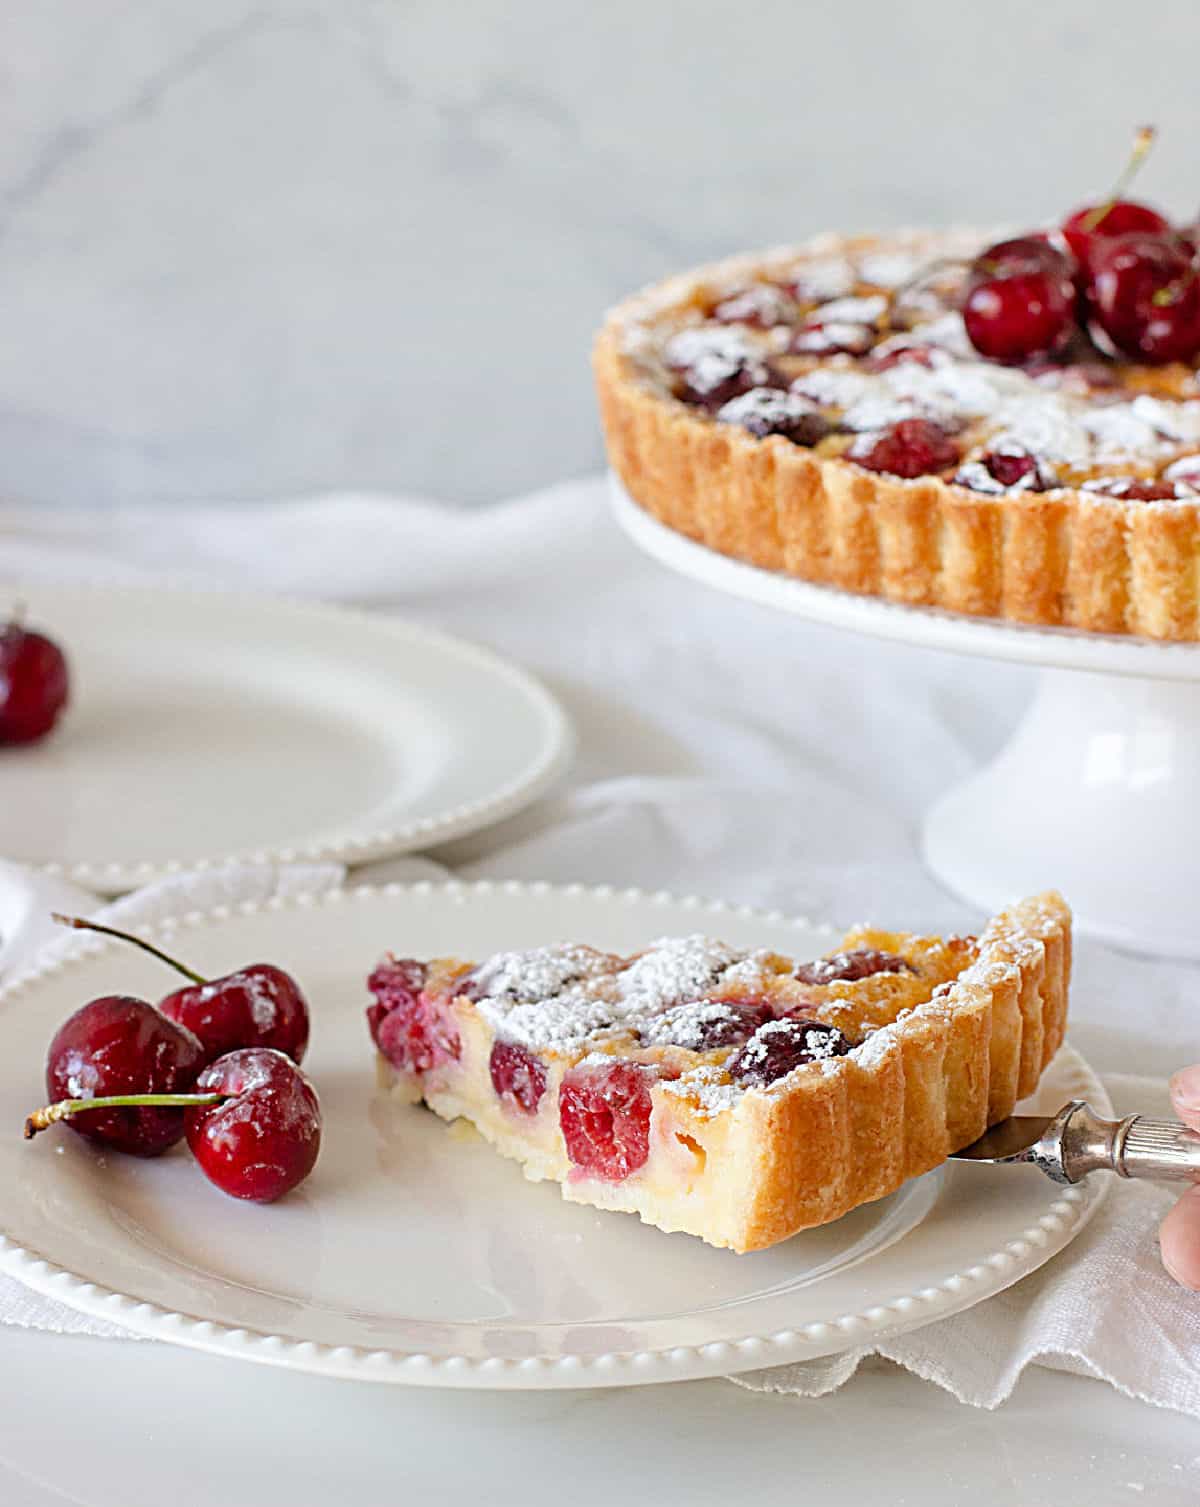 Placing a slice of cherry pie on white plate, tart on cake stand, white background